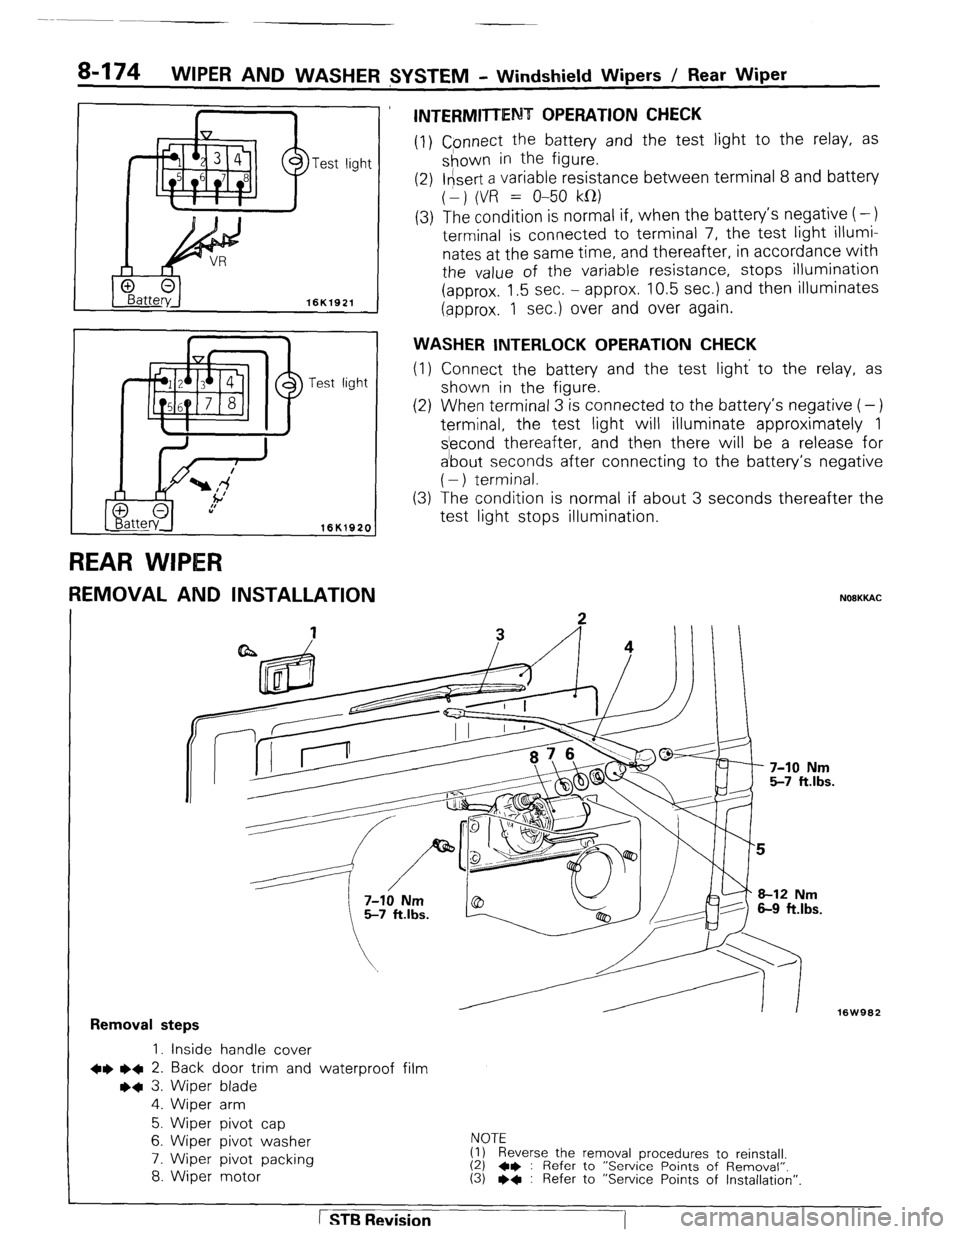 MITSUBISHI MONTERO 1987 1.G Workshop Manual a-174 WIPER AND WASHER $YSTEM - Windshield Wipers / Rear Wiper 
REAR WIPtER 
7 
-est light 
16K1920 
t 
REMOVAL AND INSTALLATION 
INTERMITTENT OPERATION CHECK 
(1) Cpnnect the battery and the test lig